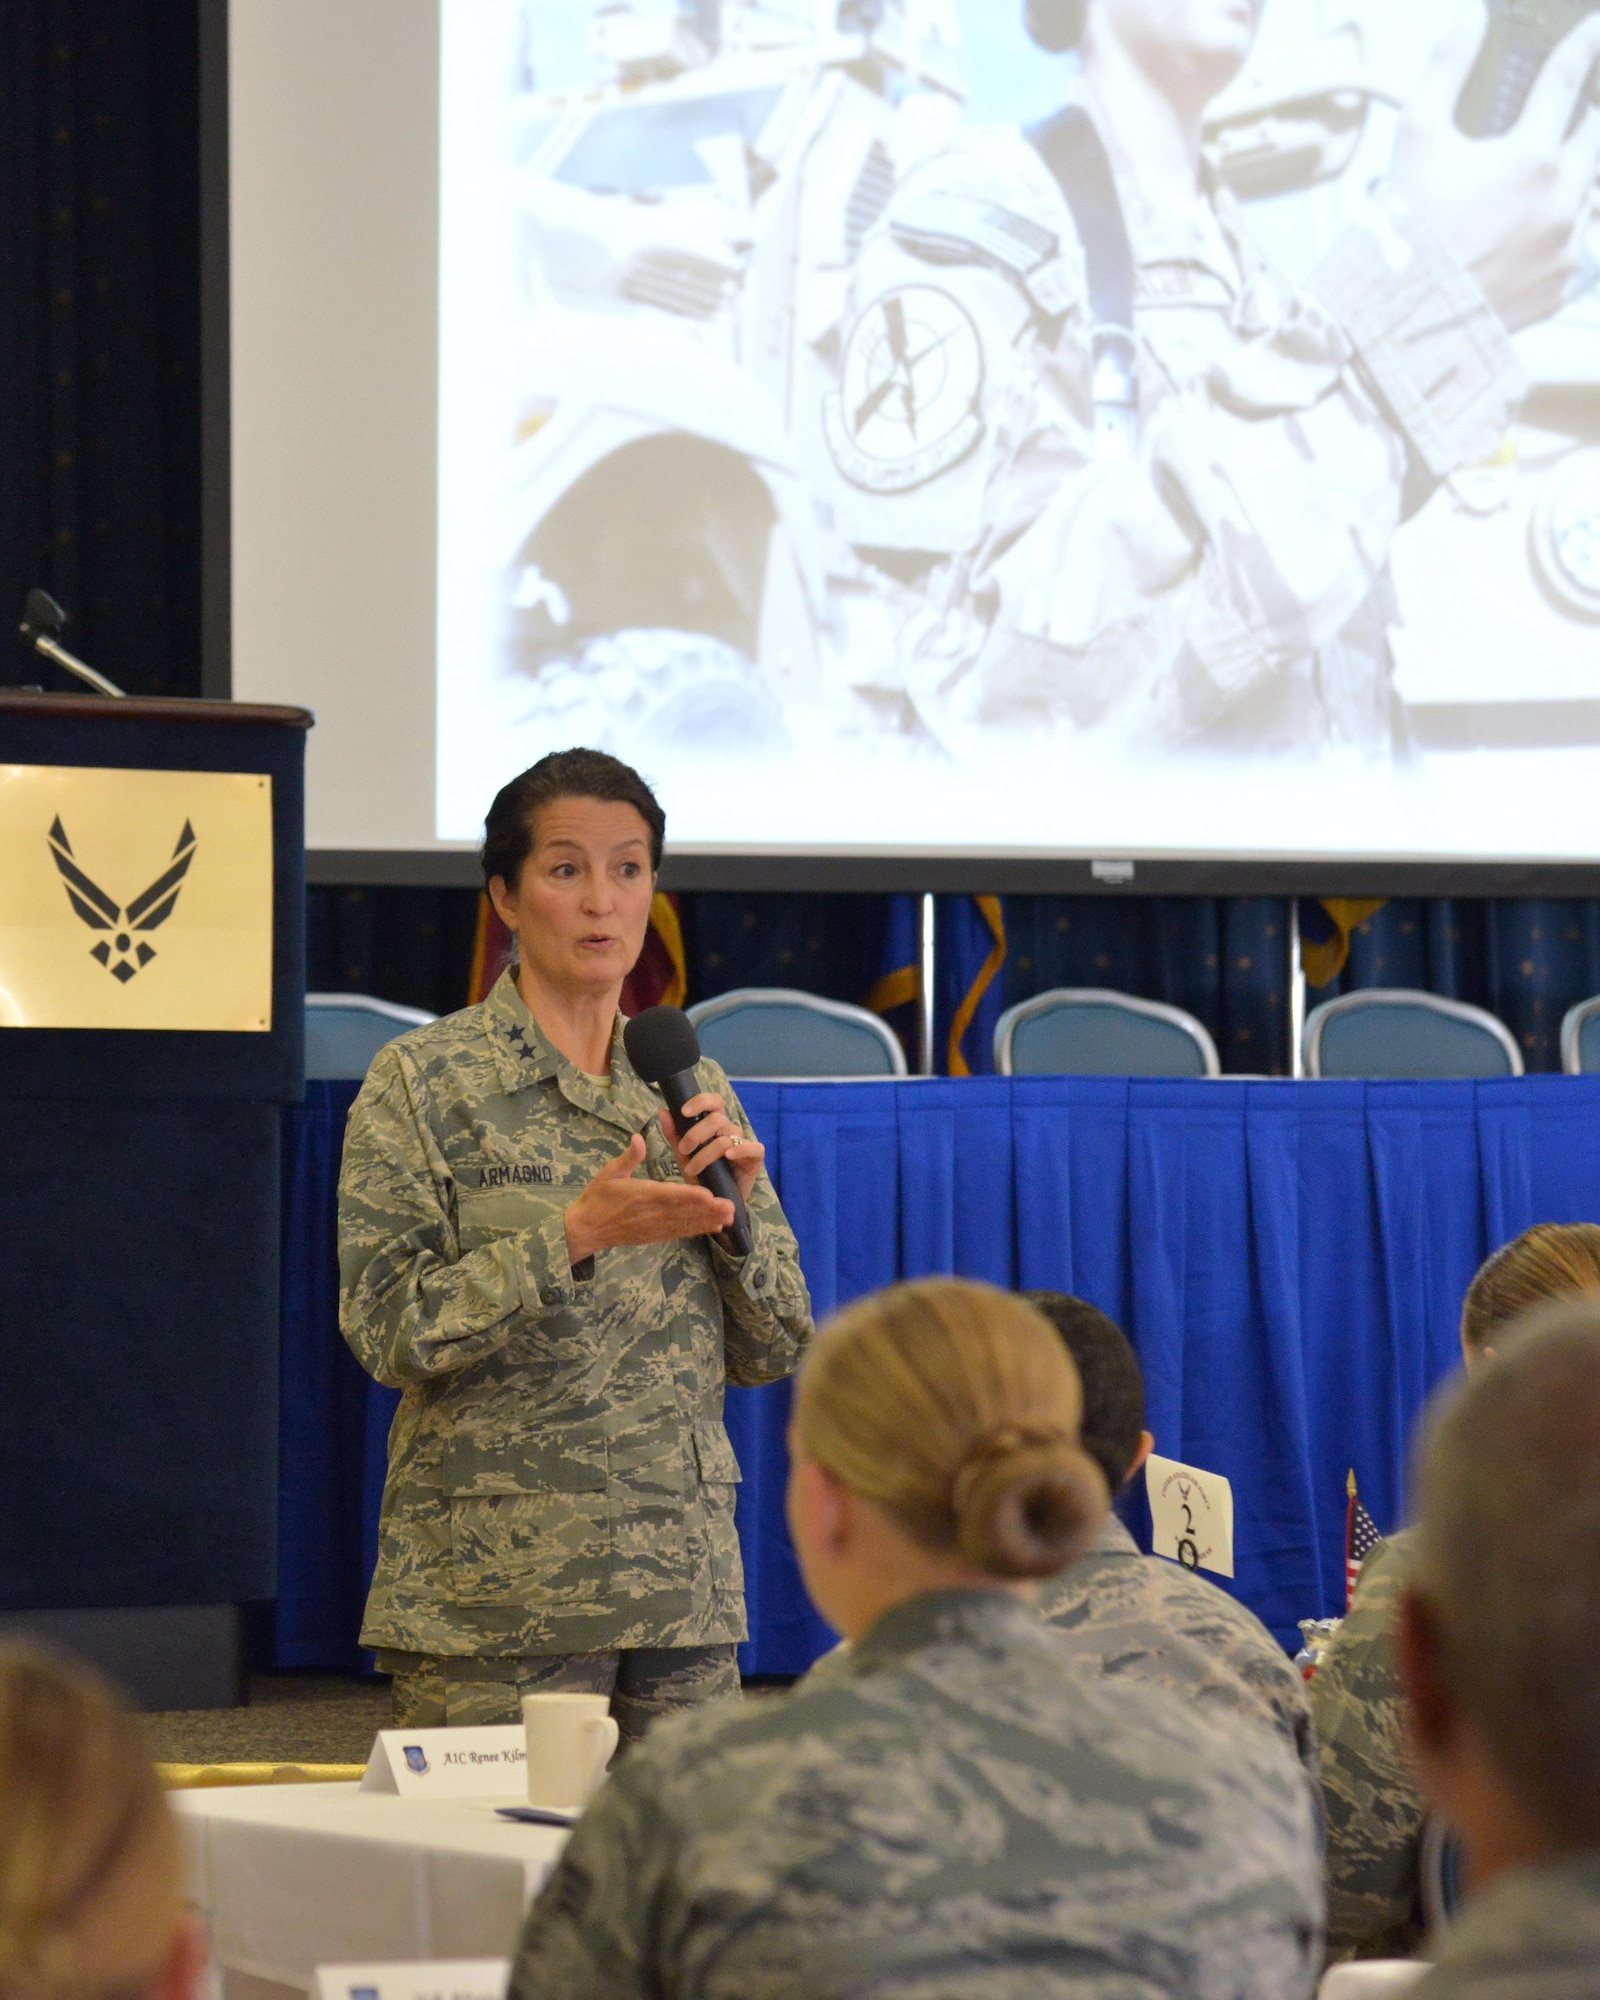 Maj. Gen. Nina Armagno, Strategic Plans, Programs, Requirements and Analysis, Headquarters Air Force Space Command director, Peterson Air Force Base, Colo., shares her experiences of persevering through challenges at the second 20th Air Force Women’s Leadership Symposium at Kirtland Air Force Base, N.M., Sept. 28, 2016. Armagno detailed her own military career and answered questions from Airmen in the audience. The three-day event supports 20th AF’s goal to coach, train and mentor nuclear professionals and leaders, while developing a nuclear command environment that fosters understanding, respect and the support necessary for people to thrive. (U.S. Air Force photo by Jamie Burnett)